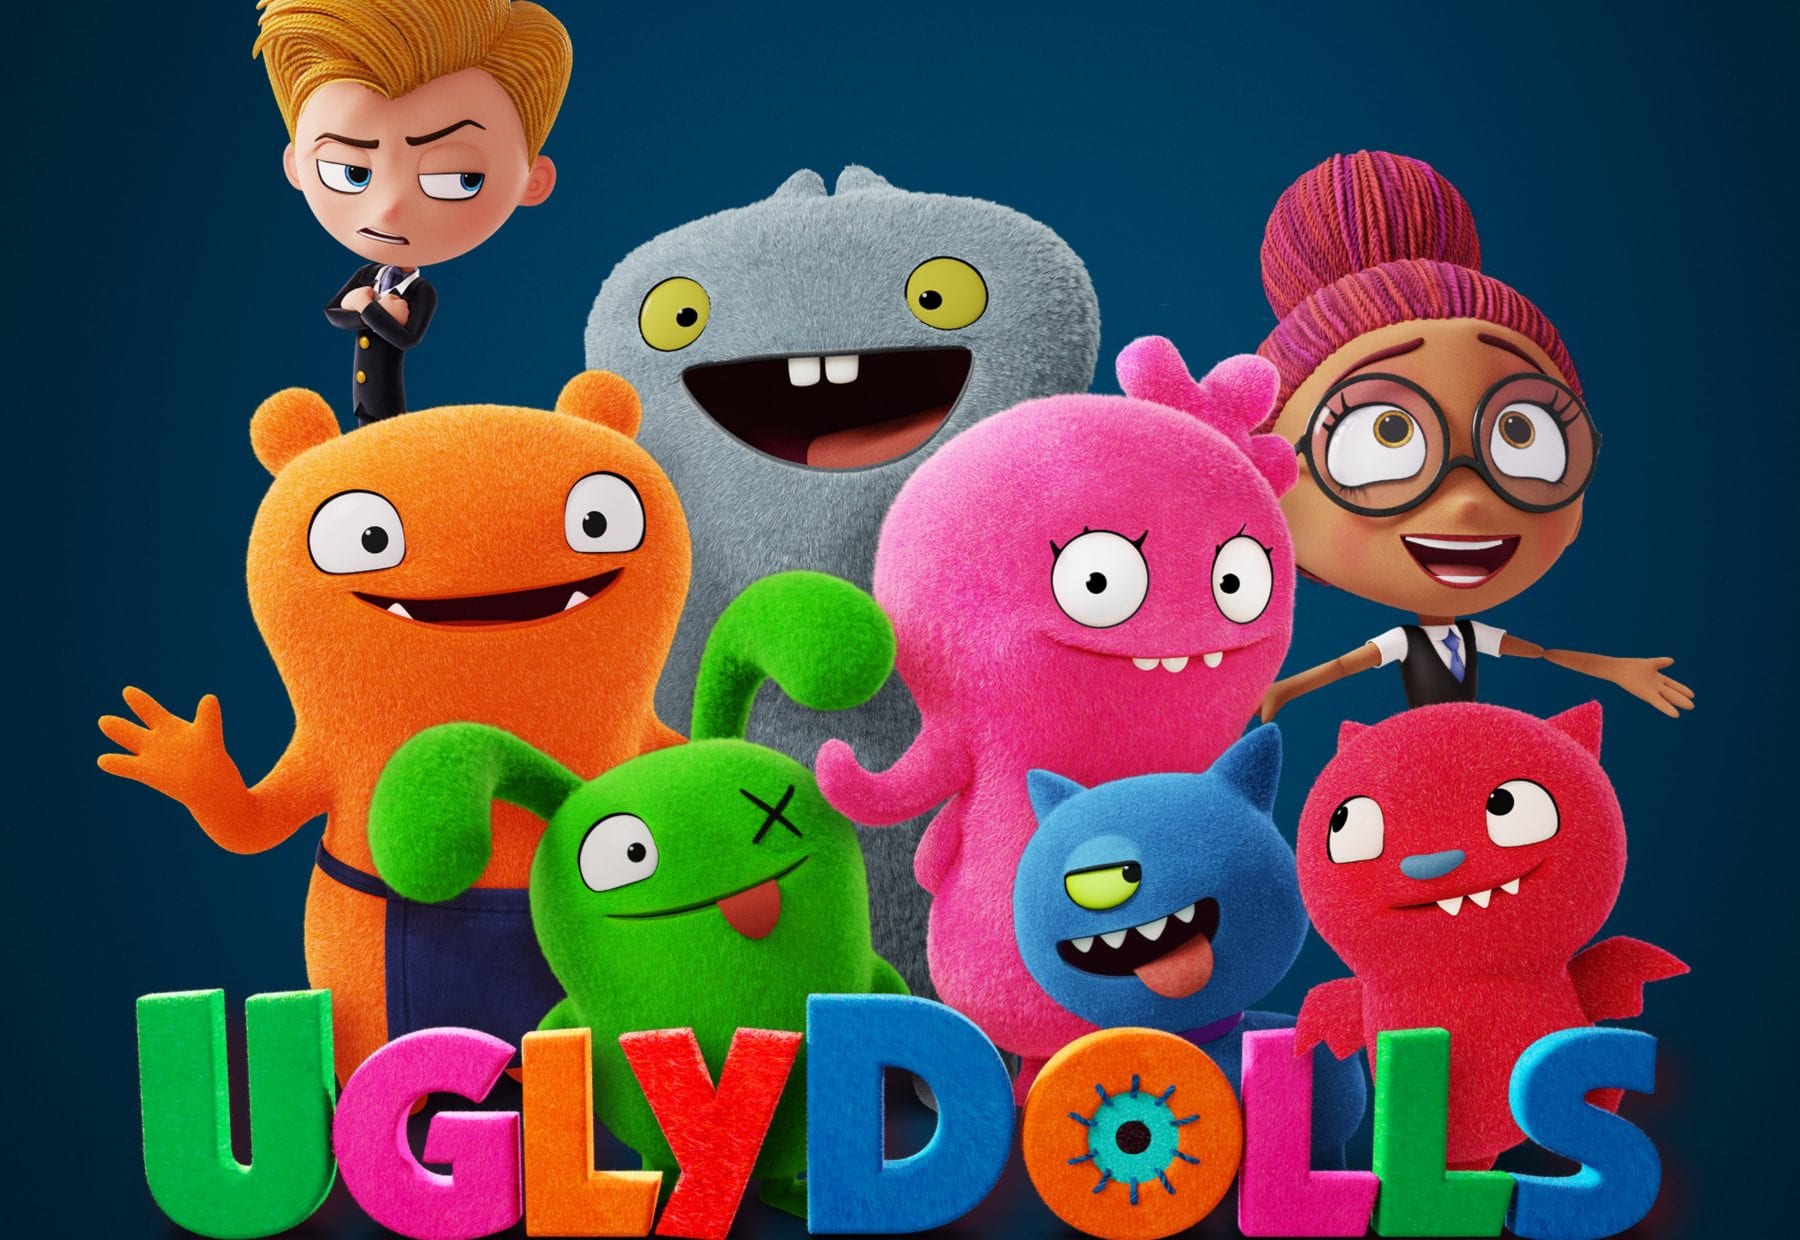 New trailer and posters for animated musical adventure UglyDolls1800 x 1240